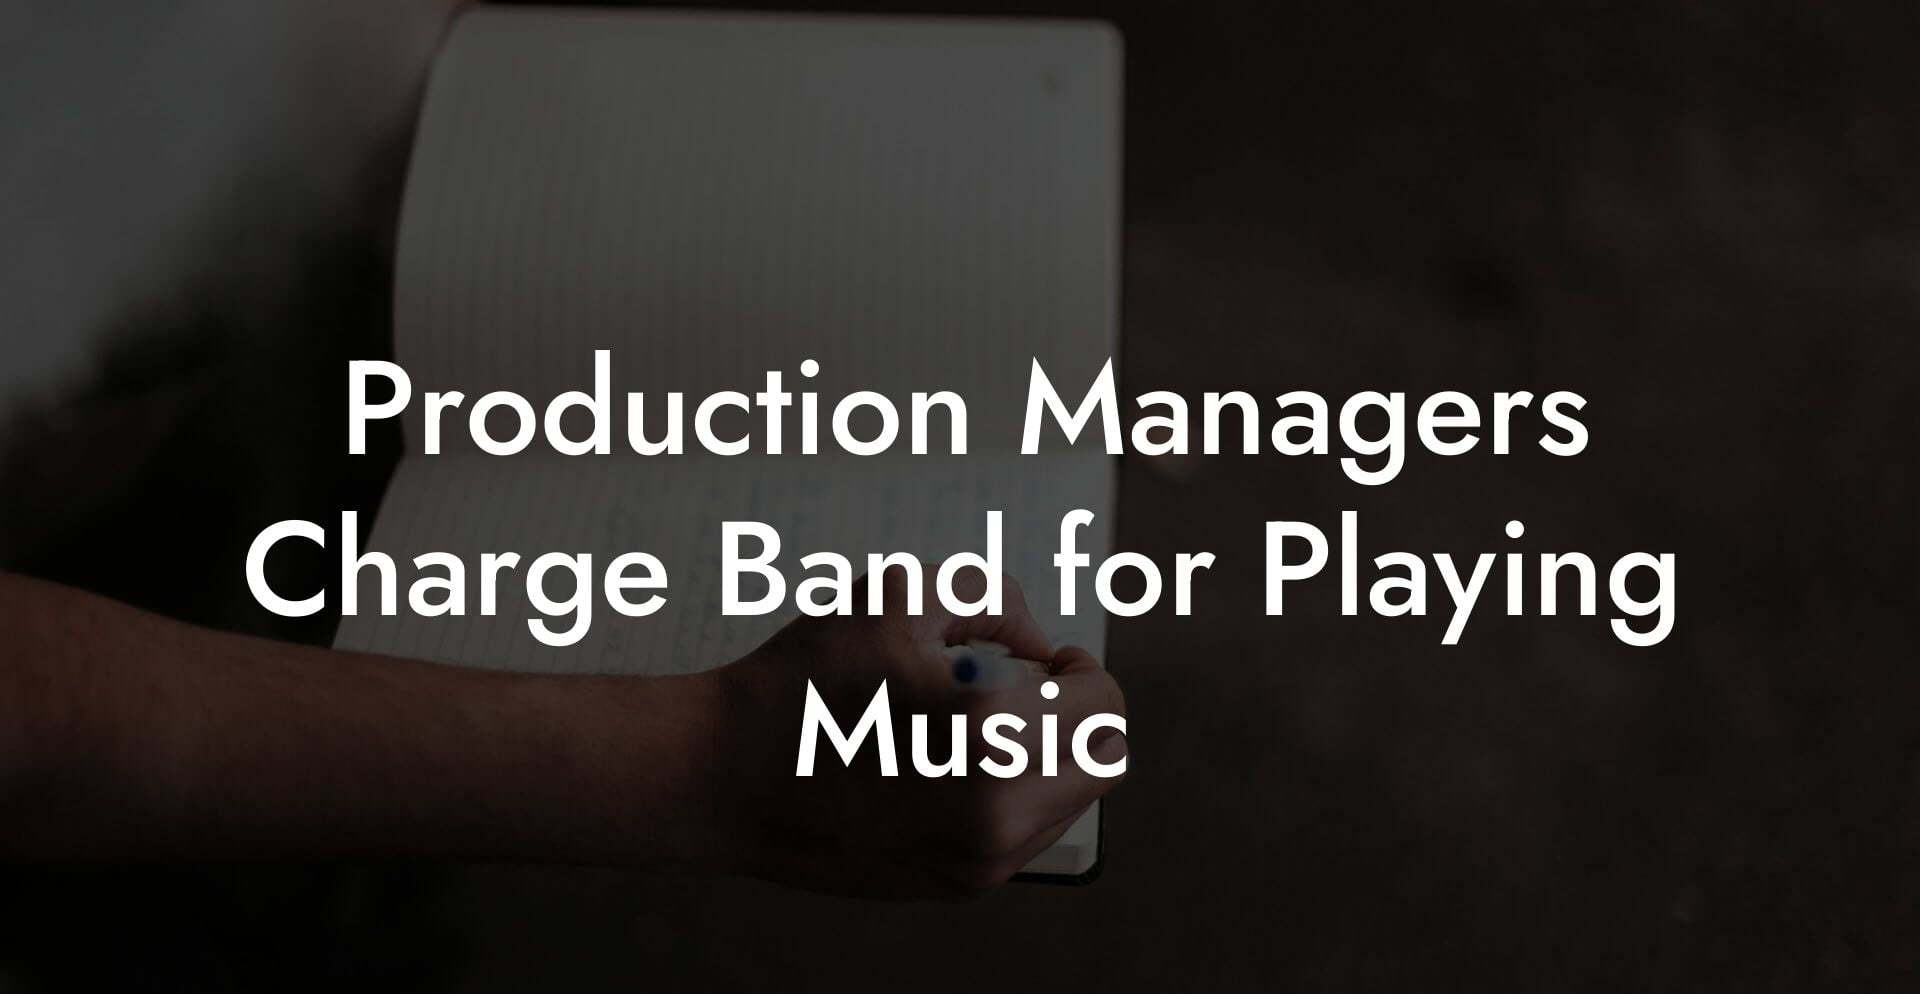 Production Managers Charge Band for Playing Music